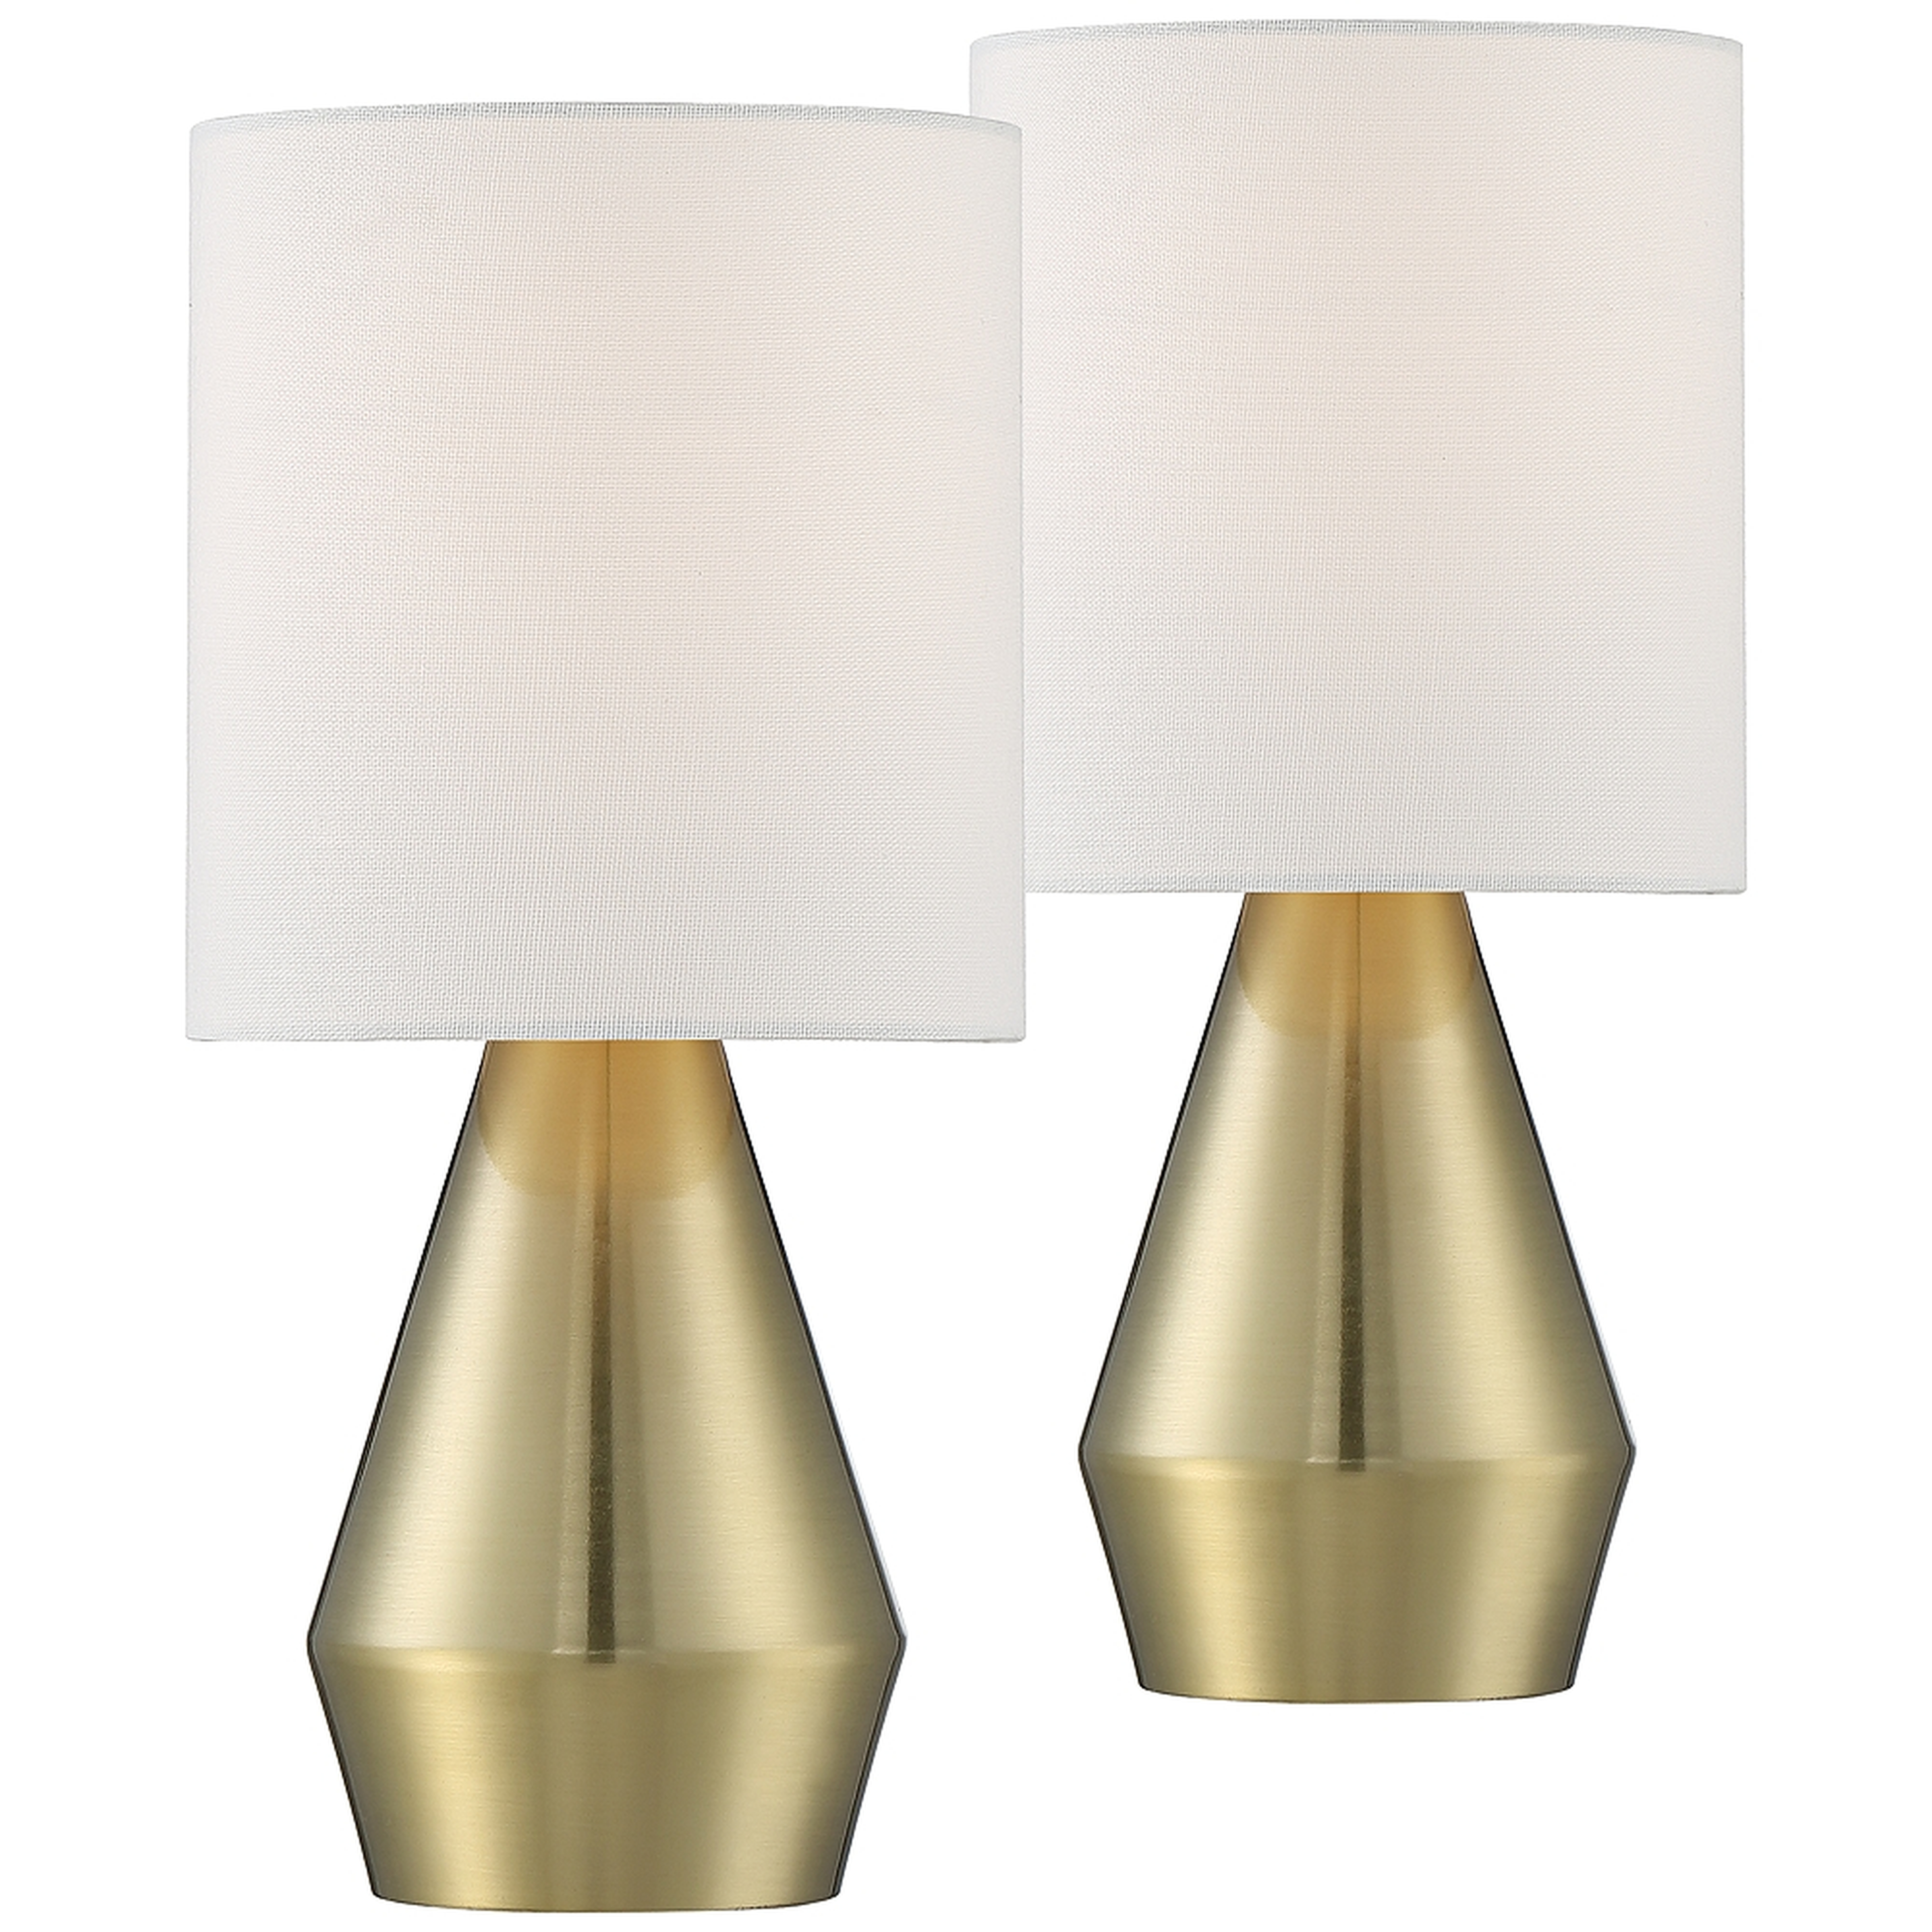 Marty 14 3/4" High Brass Accent Table Lamps Set of 2 - Style # 76A91 - Lamps Plus